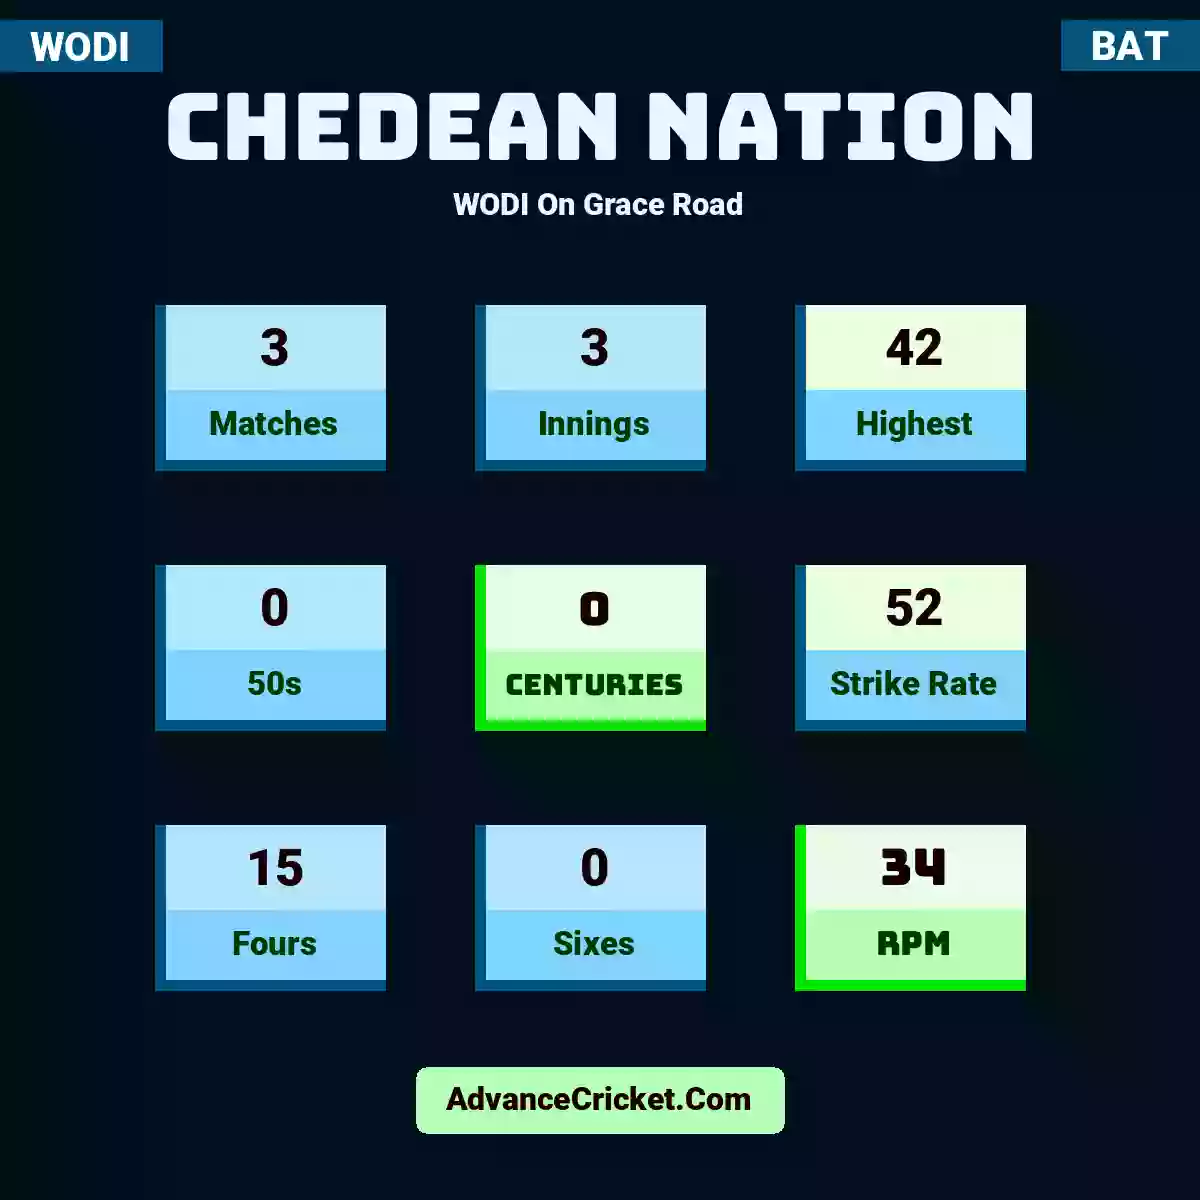 Chedean Nation WODI  On Grace Road, Chedean Nation played 3 matches, scored 42 runs as highest, 0 half-centuries, and 0 centuries, with a strike rate of 52. C.Nation hit 15 fours and 0 sixes, with an RPM of 34.